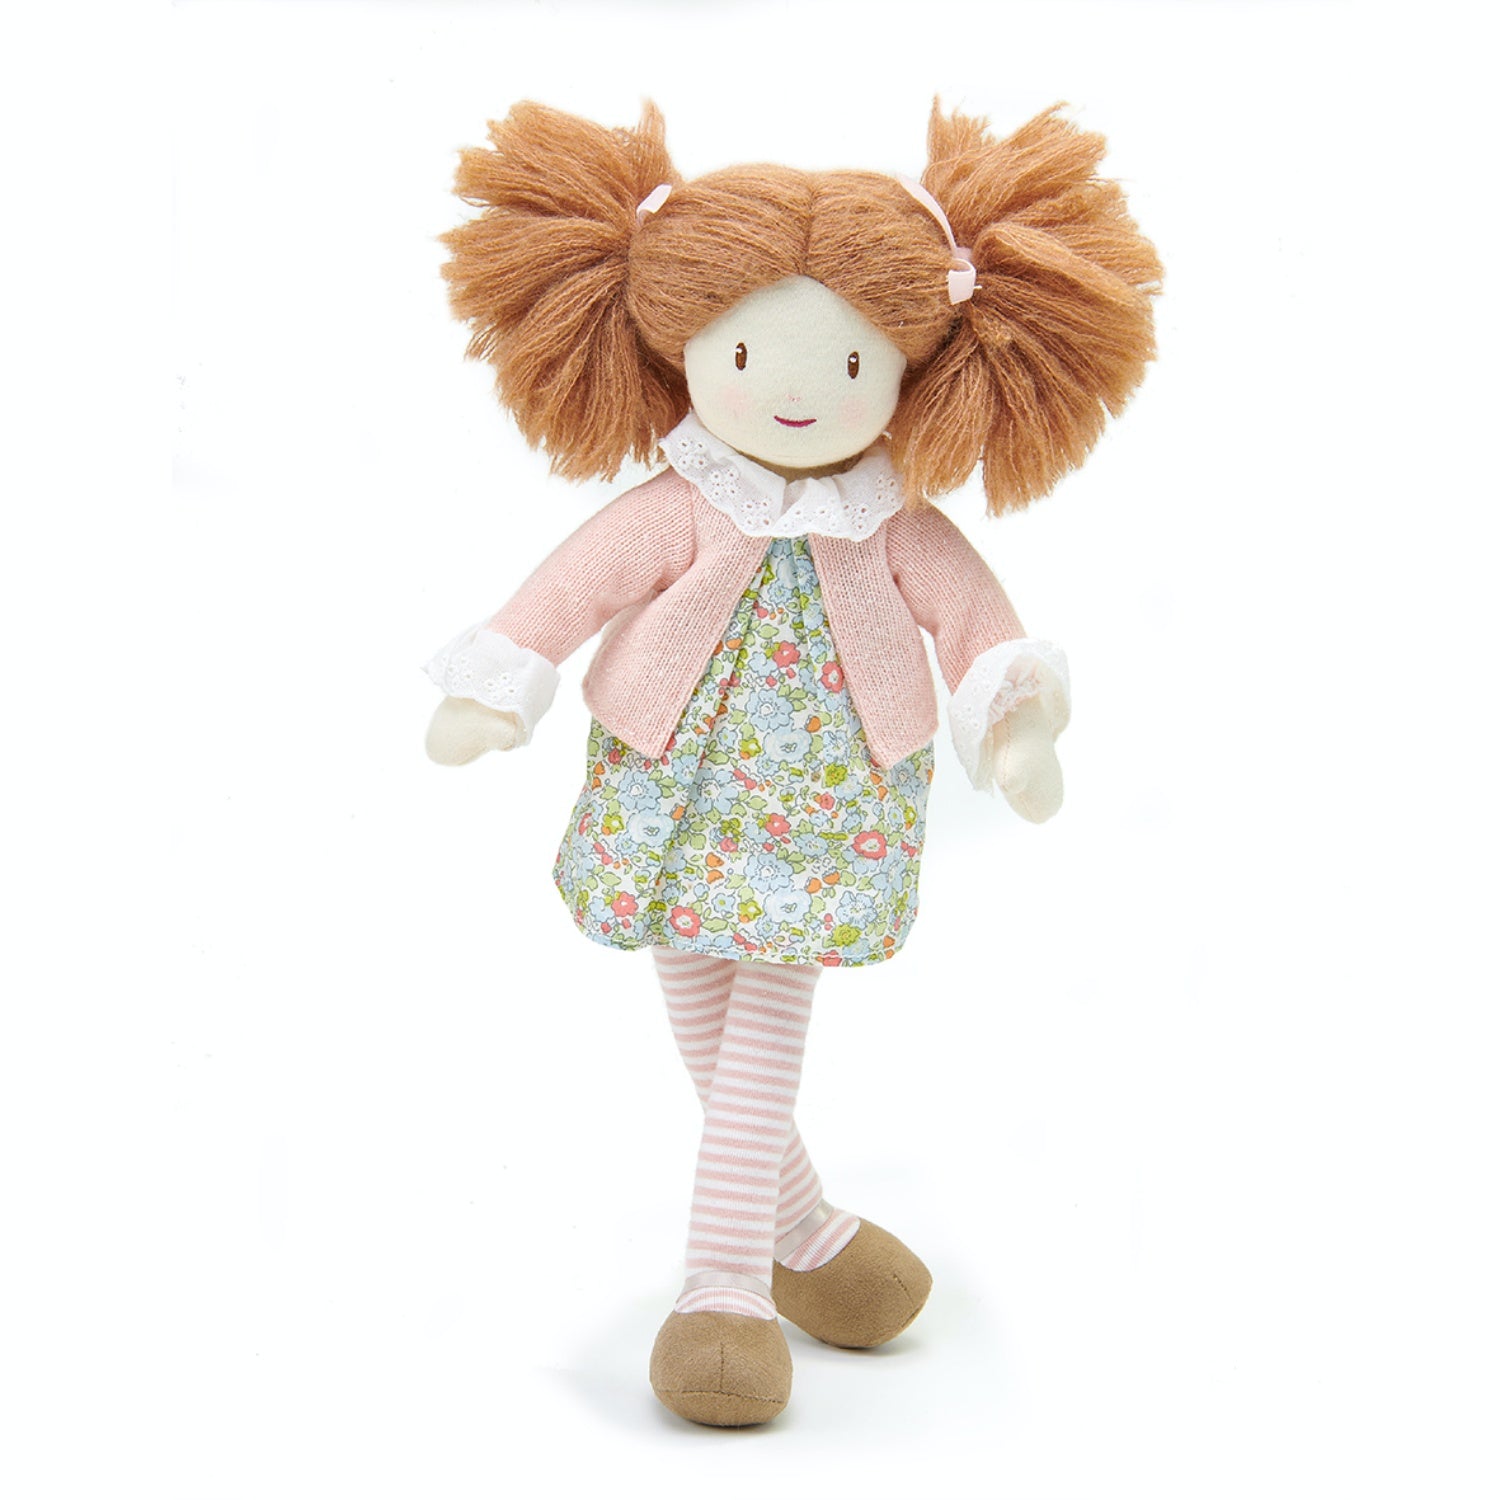 ThreadBear Design Marty Floral Rag Doll | Hand-Crafted Rag Doll | Soft Cotton Children’s Doll | Front View – Rag Doll Marty Sitting | BeoVERDE.ie